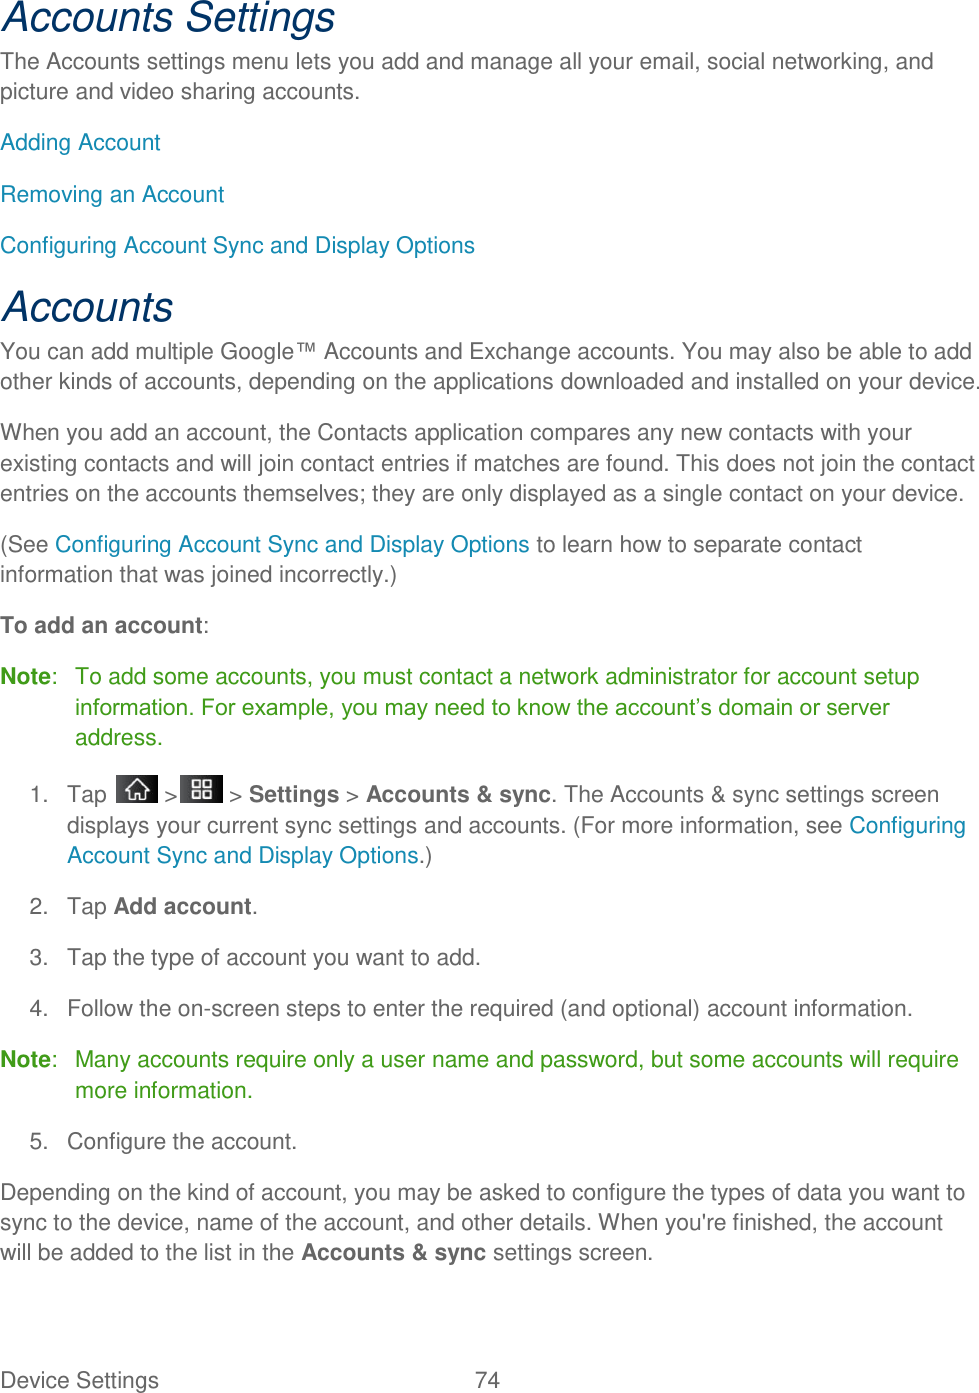 Device Settings  74 Accounts Settings The Accounts settings menu lets you add and manage all your email, social networking, and picture and video sharing accounts.  Adding Account Removing an Account  Configuring Account Sync and Display Options Accounts You can add multiple Google™ Accounts and Exchange accounts. You may also be able to add other kinds of accounts, depending on the applications downloaded and installed on your device. When you add an account, the Contacts application compares any new contacts with your existing contacts and will join contact entries if matches are found. This does not join the contact entries on the accounts themselves; they are only displayed as a single contact on your device. (See Configuring Account Sync and Display Options to learn how to separate contact information that was joined incorrectly.) To add an account: Note:   To add some accounts, you must contact a network administrator for account setup information. For example, you may need to know the account‘s domain or server address. 1.  Tap   &gt;  &gt; Settings &gt; Accounts &amp; sync. The Accounts &amp; sync settings screen displays your current sync settings and accounts. (For more information, see Configuring Account Sync and Display Options.) 2.  Tap Add account. 3.  Tap the type of account you want to add. 4.  Follow the on-screen steps to enter the required (and optional) account information. Note:   Many accounts require only a user name and password, but some accounts will require more information. 5.  Configure the account. Depending on the kind of account, you may be asked to configure the types of data you want to sync to the device, name of the account, and other details. When you&apos;re finished, the account will be added to the list in the Accounts &amp; sync settings screen. 